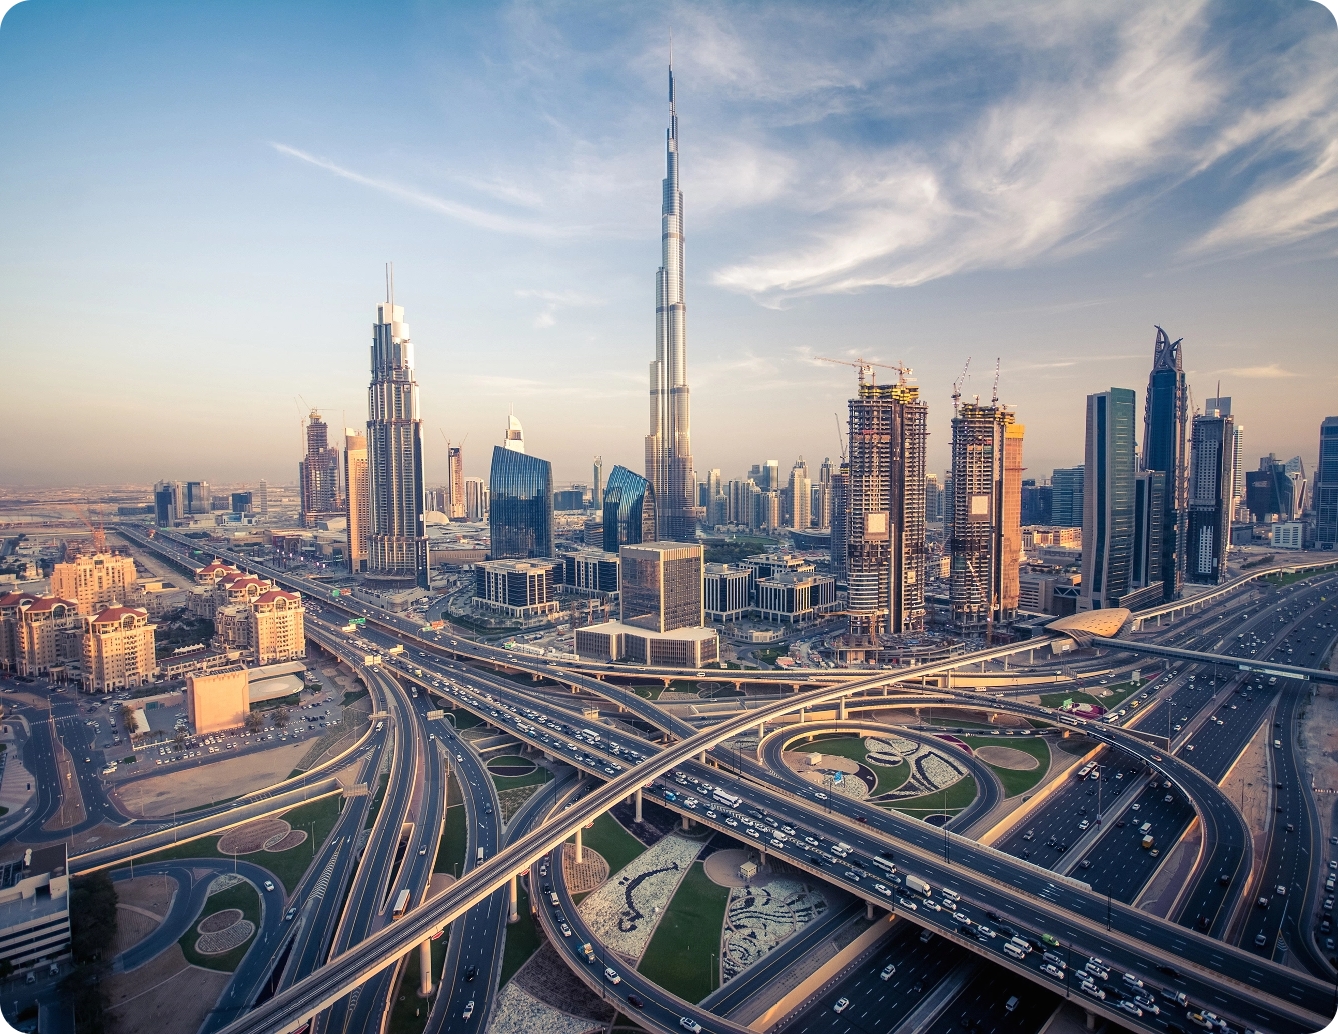 What Are The Conditions Of Freezones In Dubai?